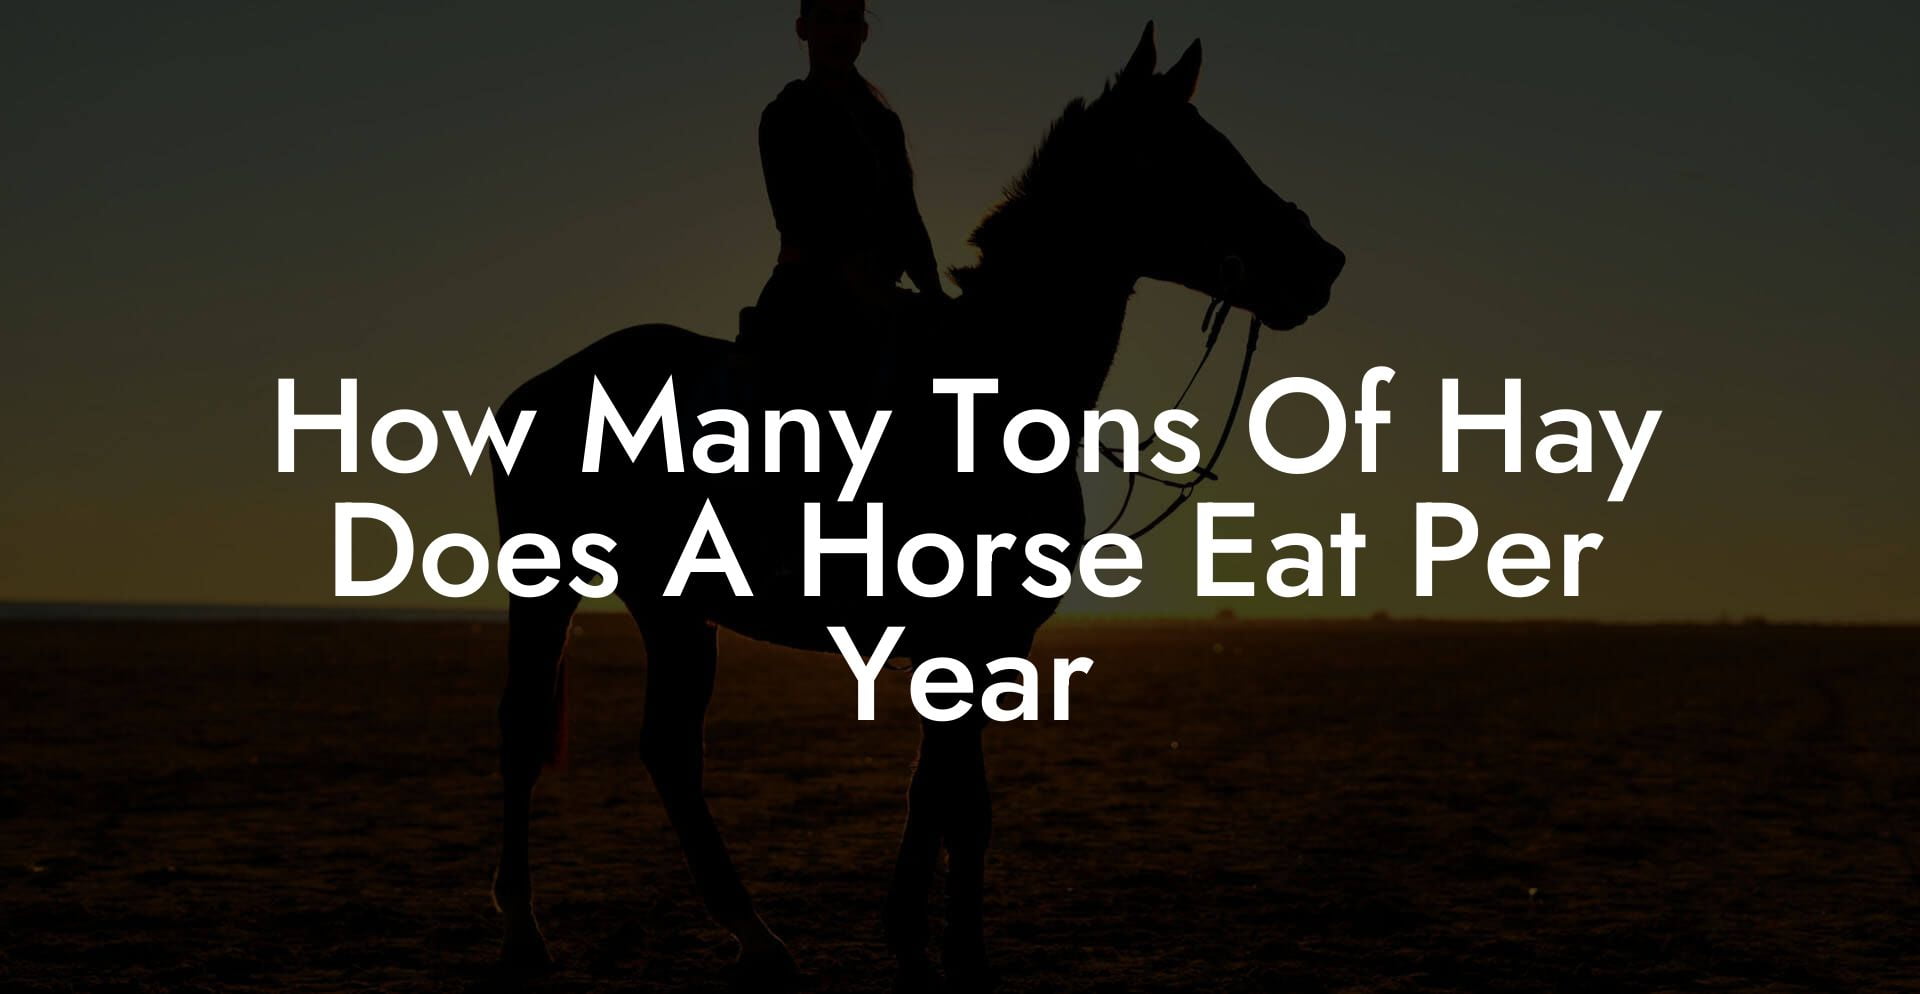 How Many Tons Of Hay Does A Horse Eat Per Year